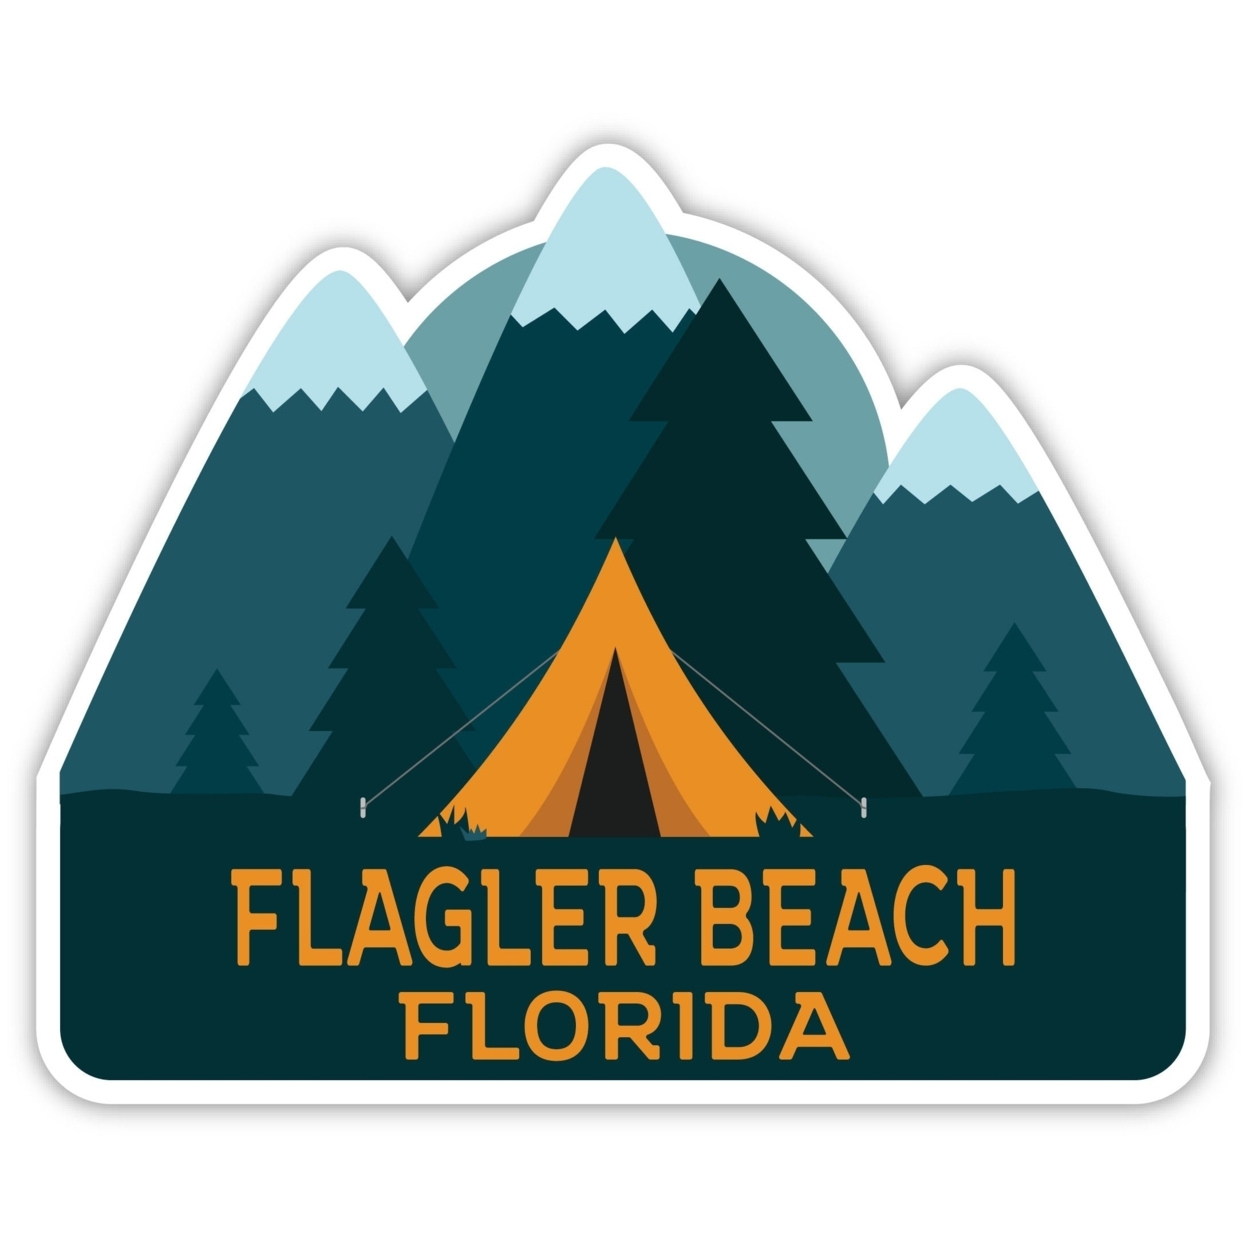 Flagler Beach Florida Souvenir Decorative Stickers (Choose Theme And Size) - 4-Pack, 12-Inch, Tent